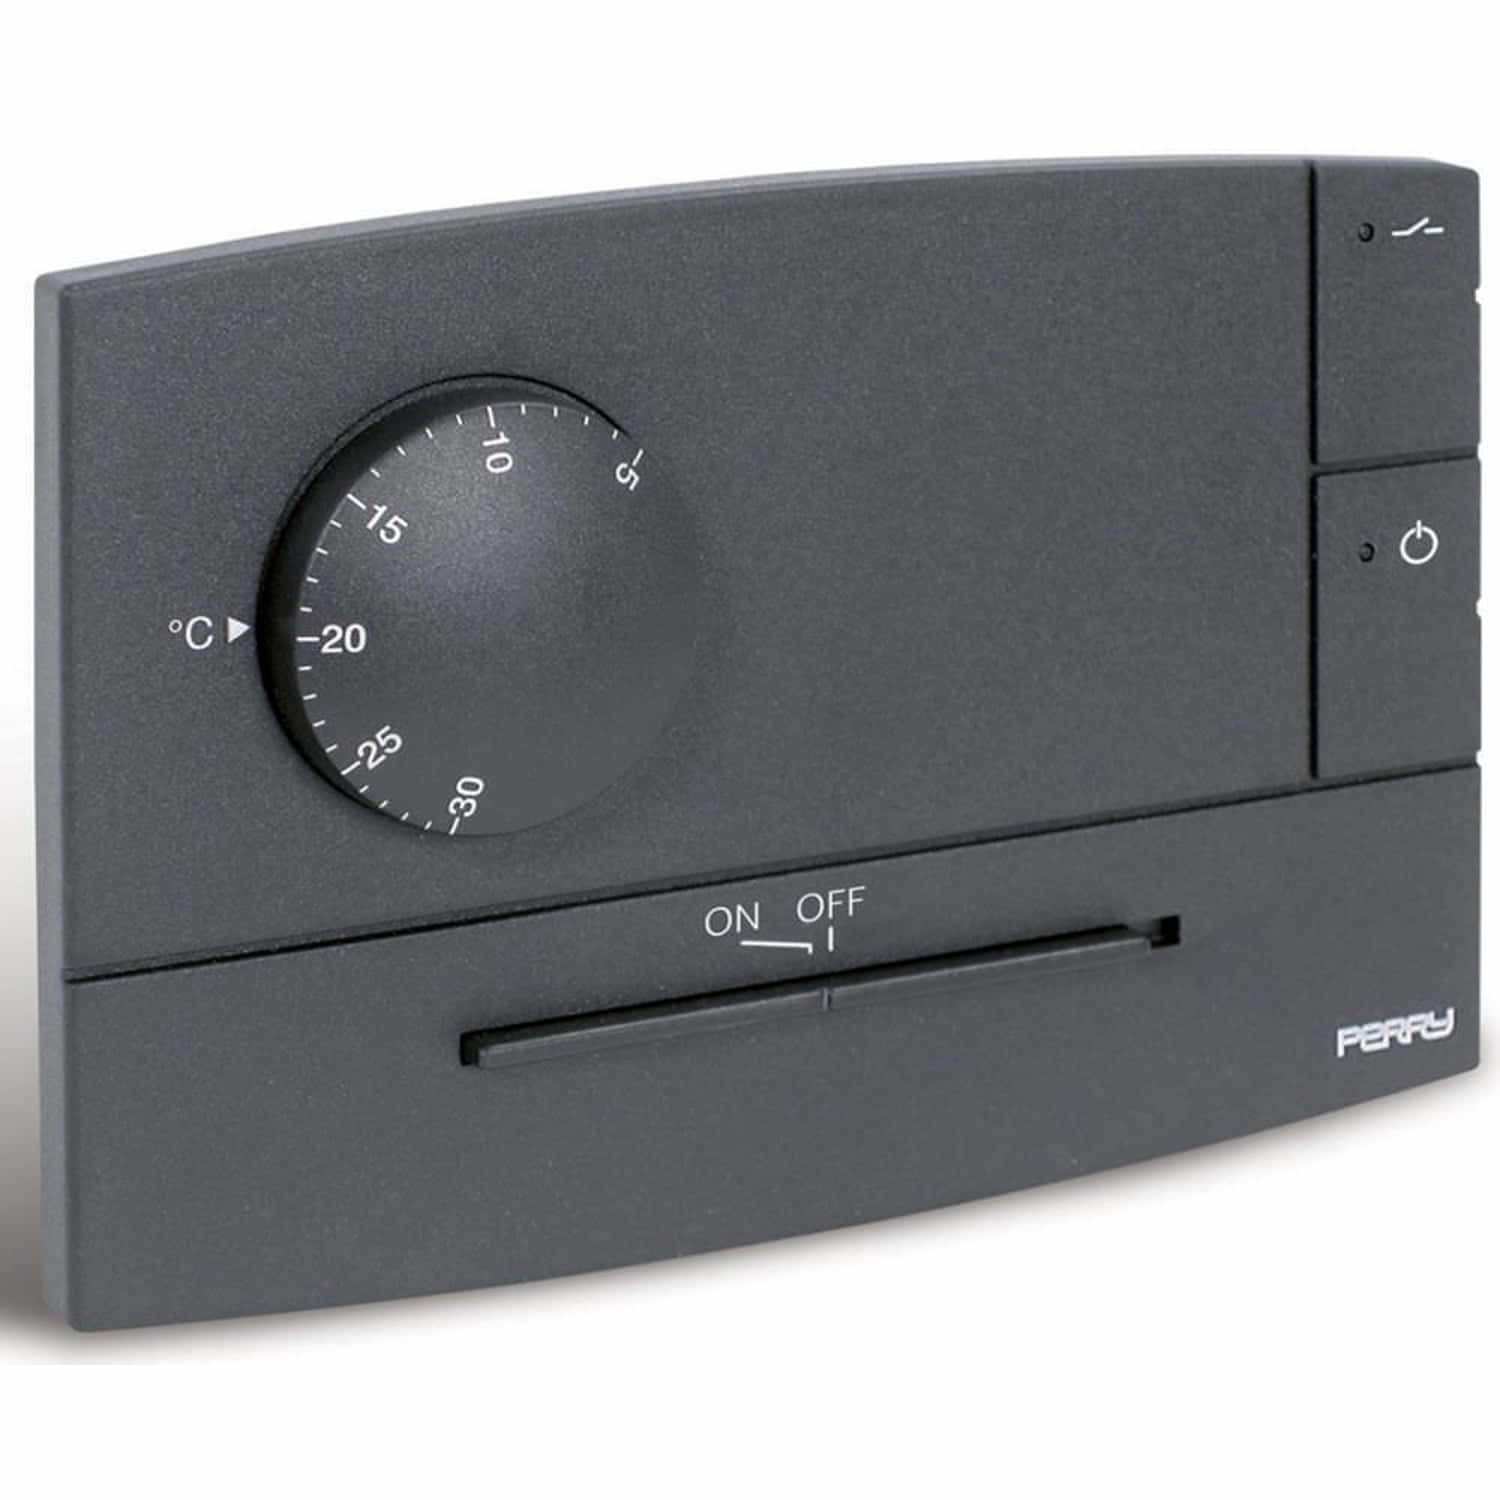 ONOFF electronic control thermostat